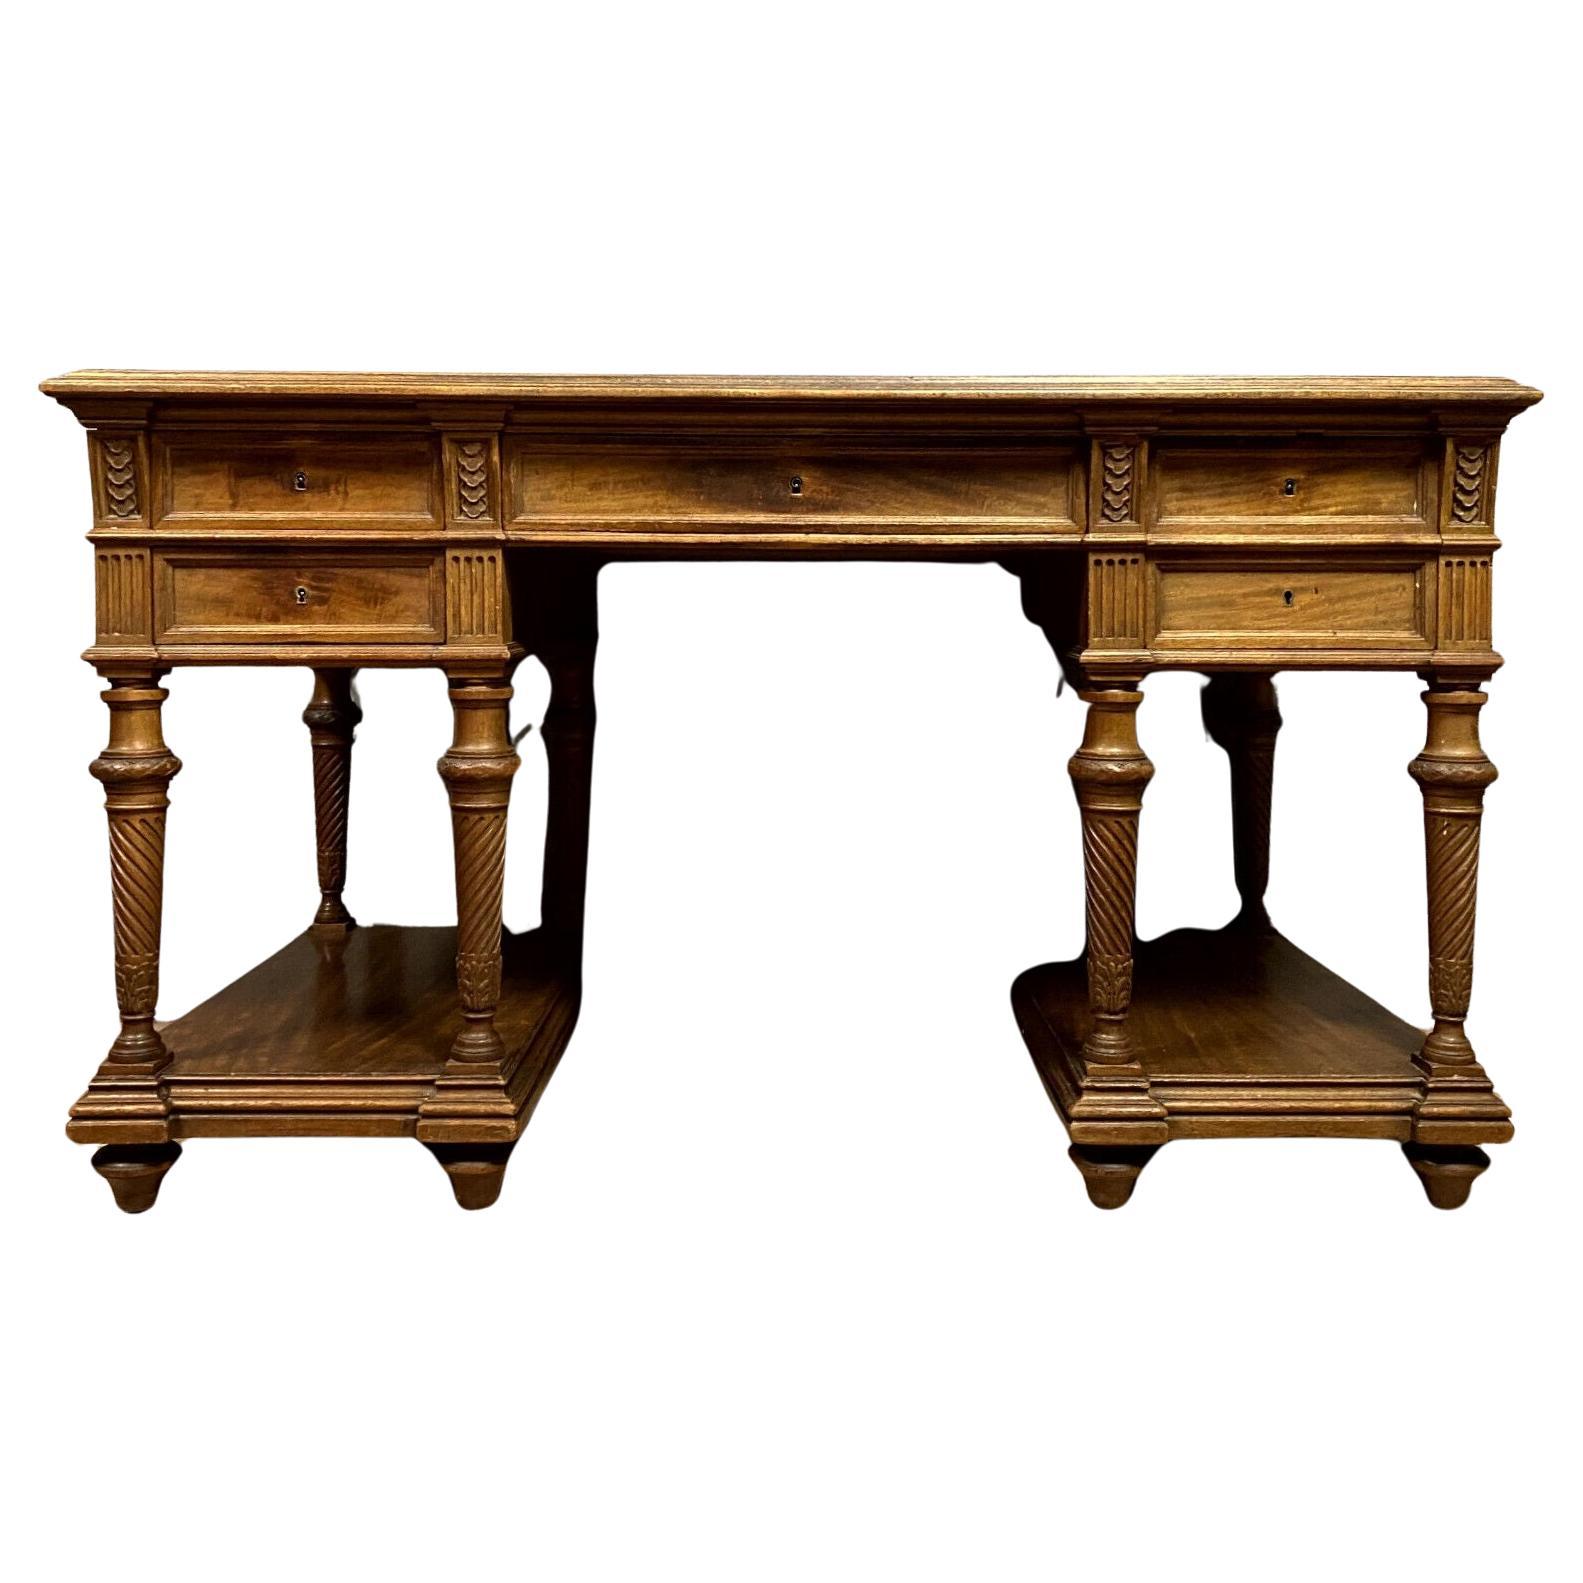 19th Century Mazarin Style Center Desk with Drawers in Walnut -1X54 For Sale